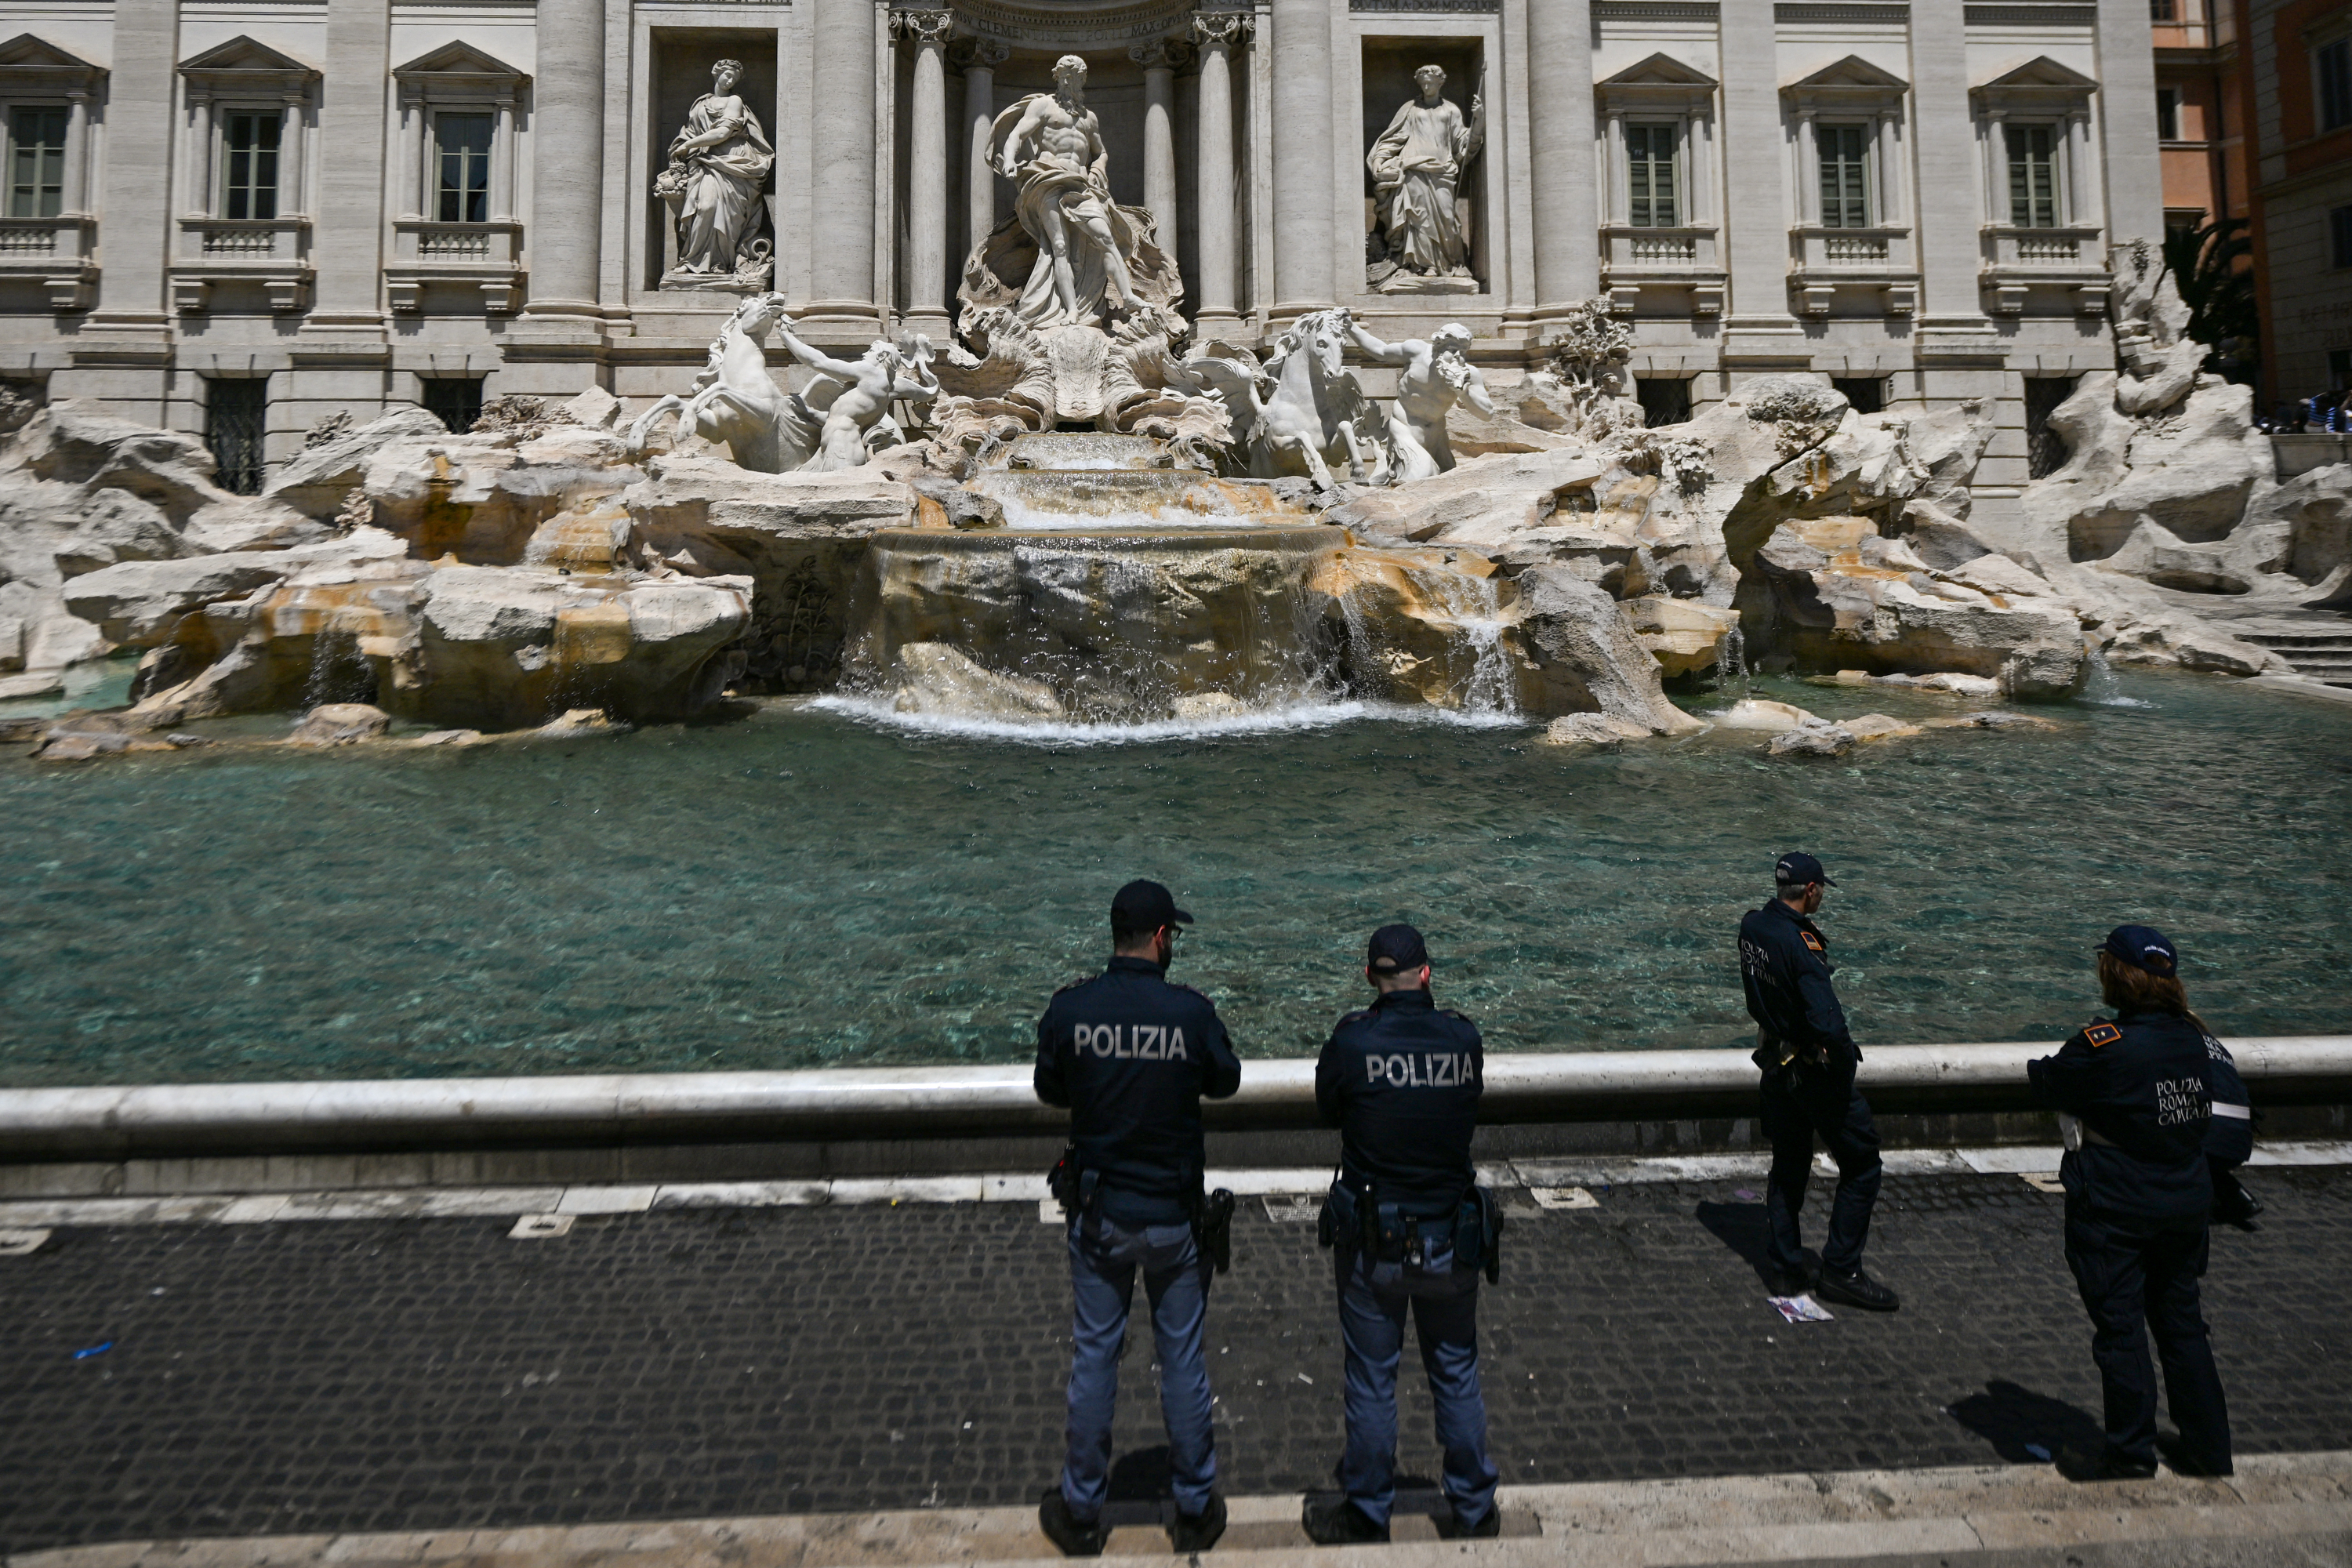 Police stand guard May 21, 2023 at the Fontana di Trevi fountain in central Rome after Last Generation (Ultima Generazione) environmental activists spill black liquid